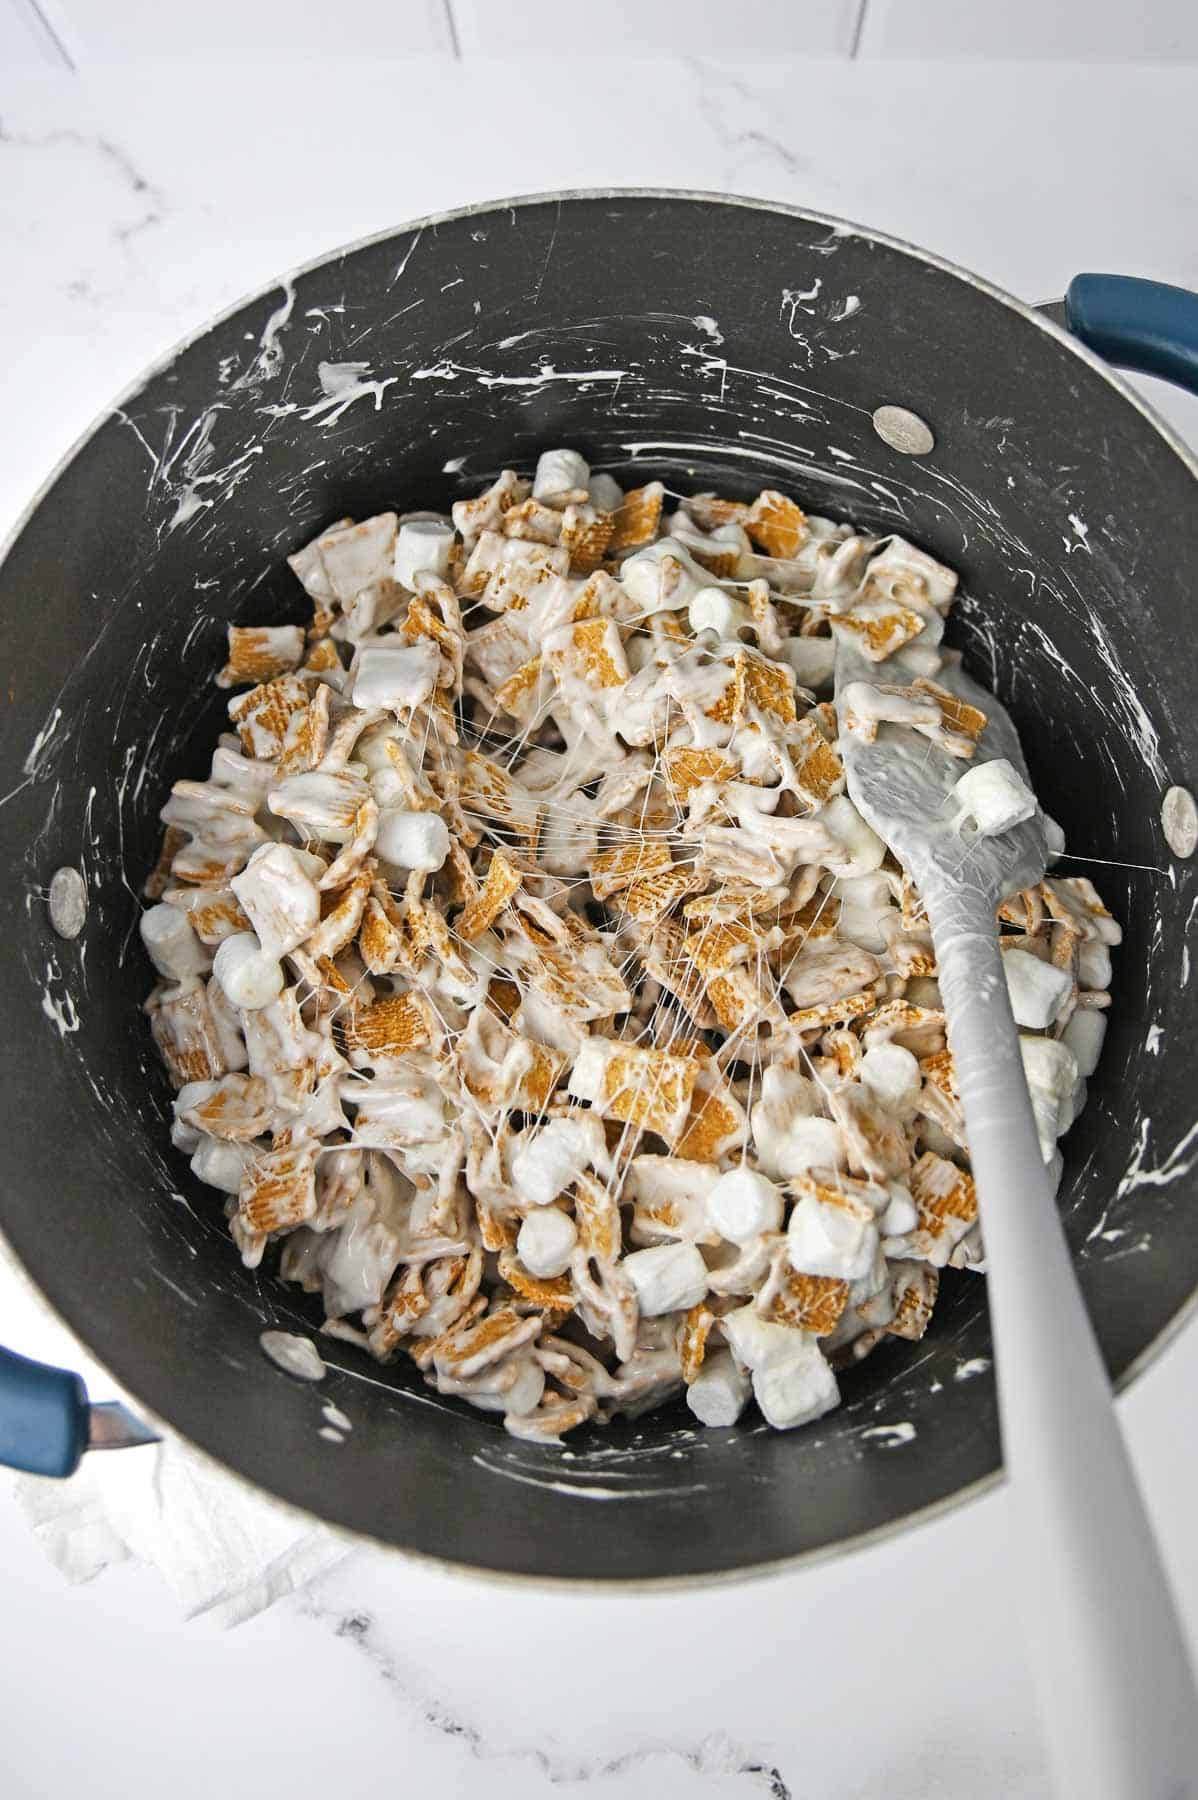 Golden grahams cereal stirred into the melted marshmallow mixture in a large pot.